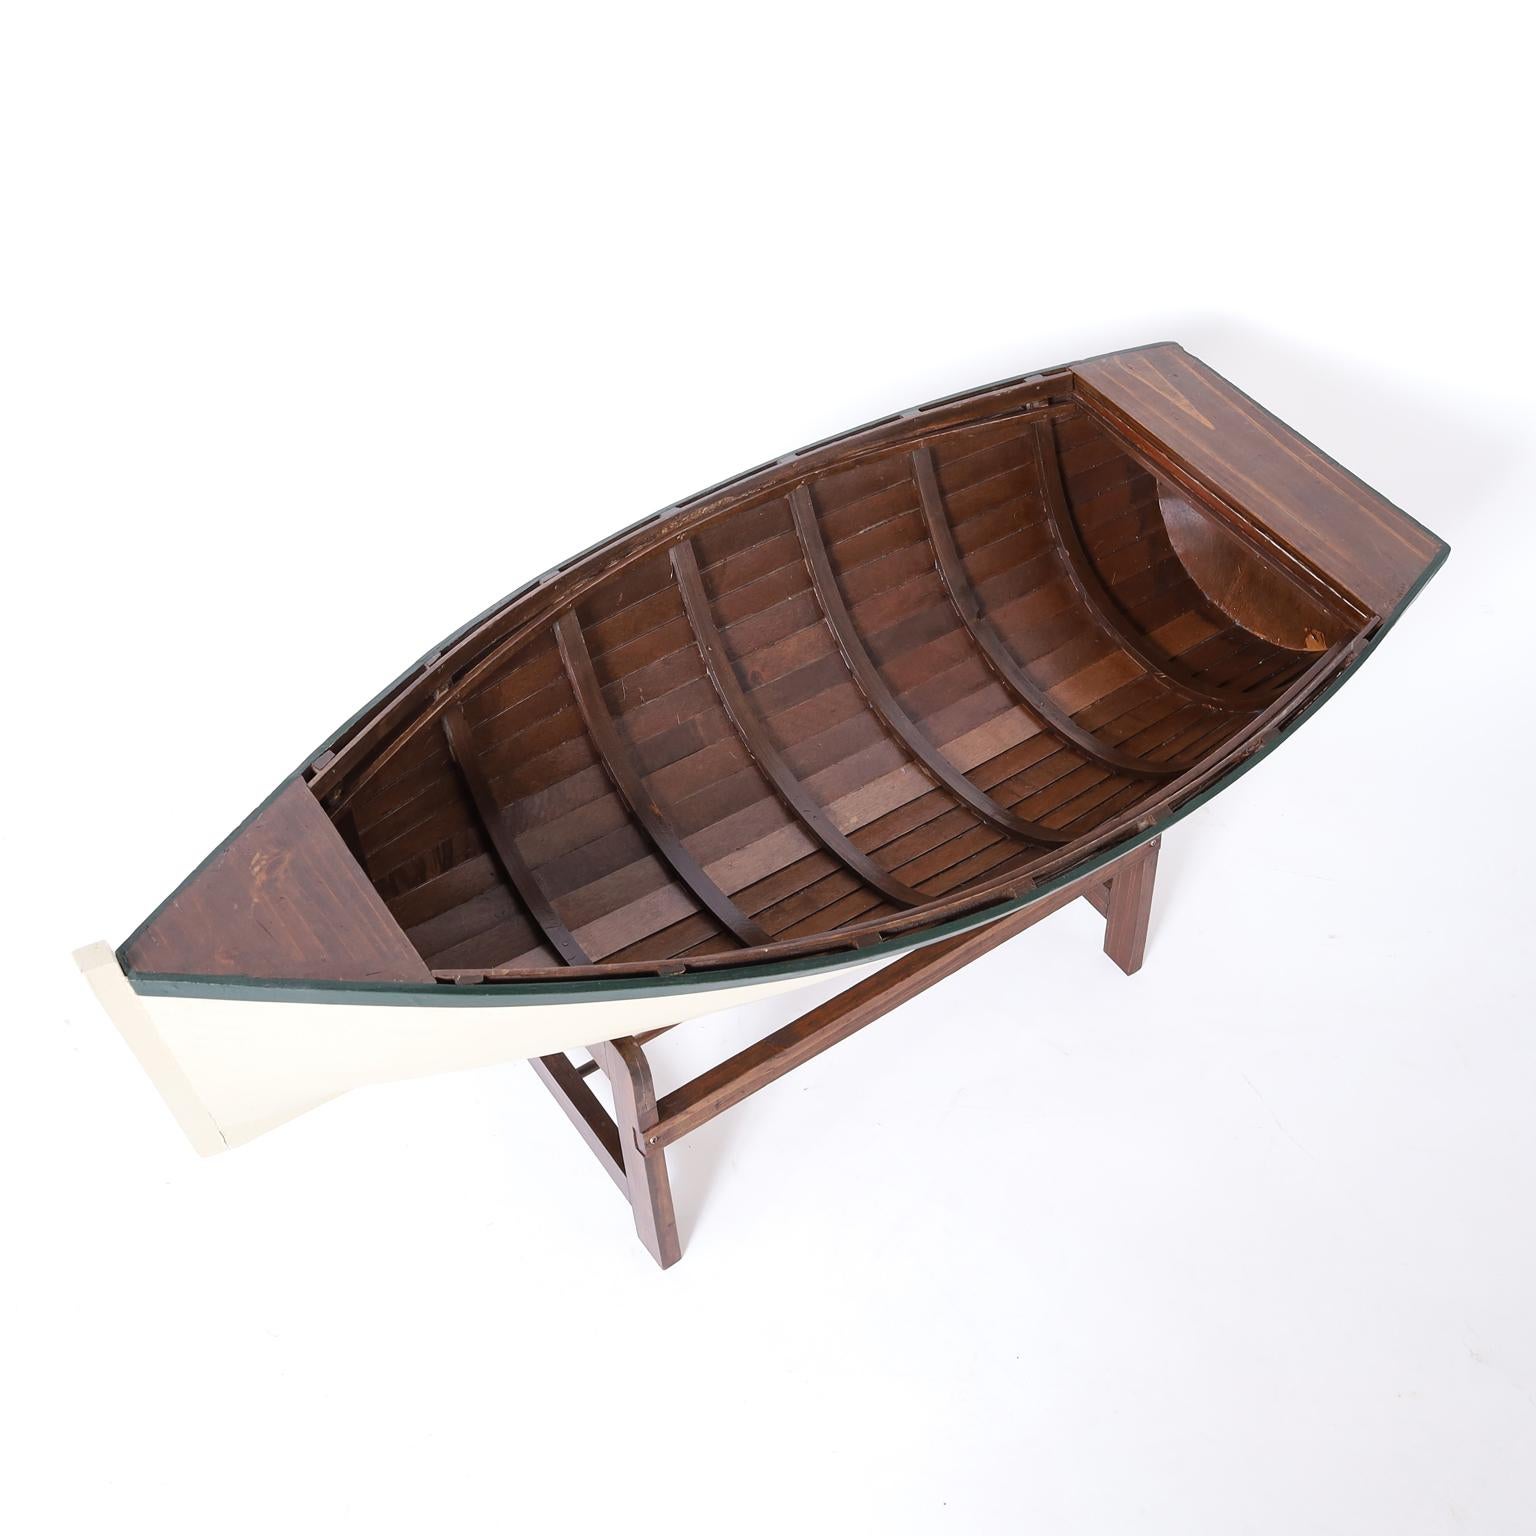 Vintage row boat model hand crafted in mahogany with ambitious accuracy. Painted white with green trim and presented in a custom handcrafted stand.